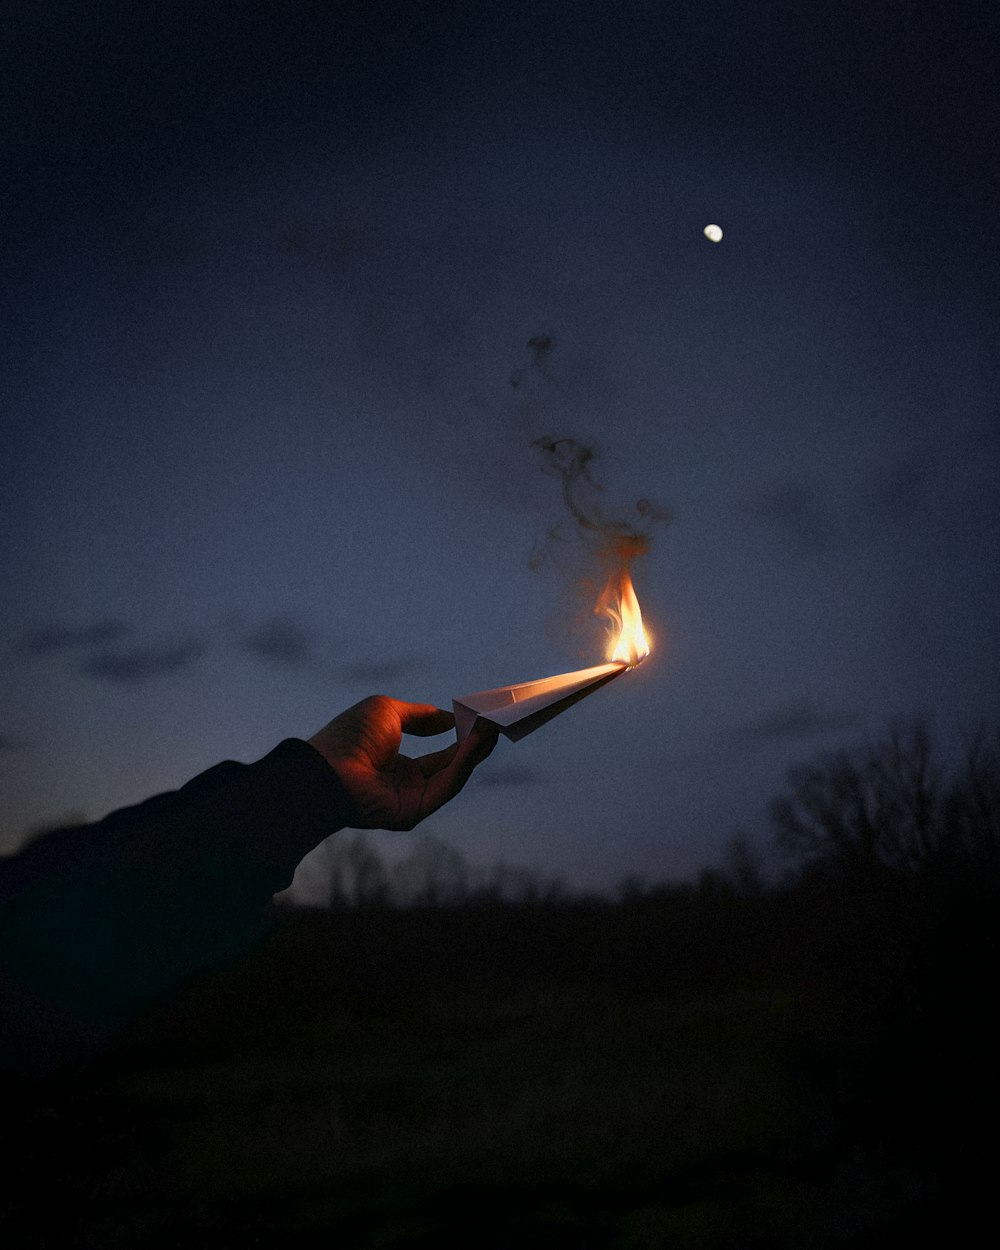 a person holding a lit match in their hand